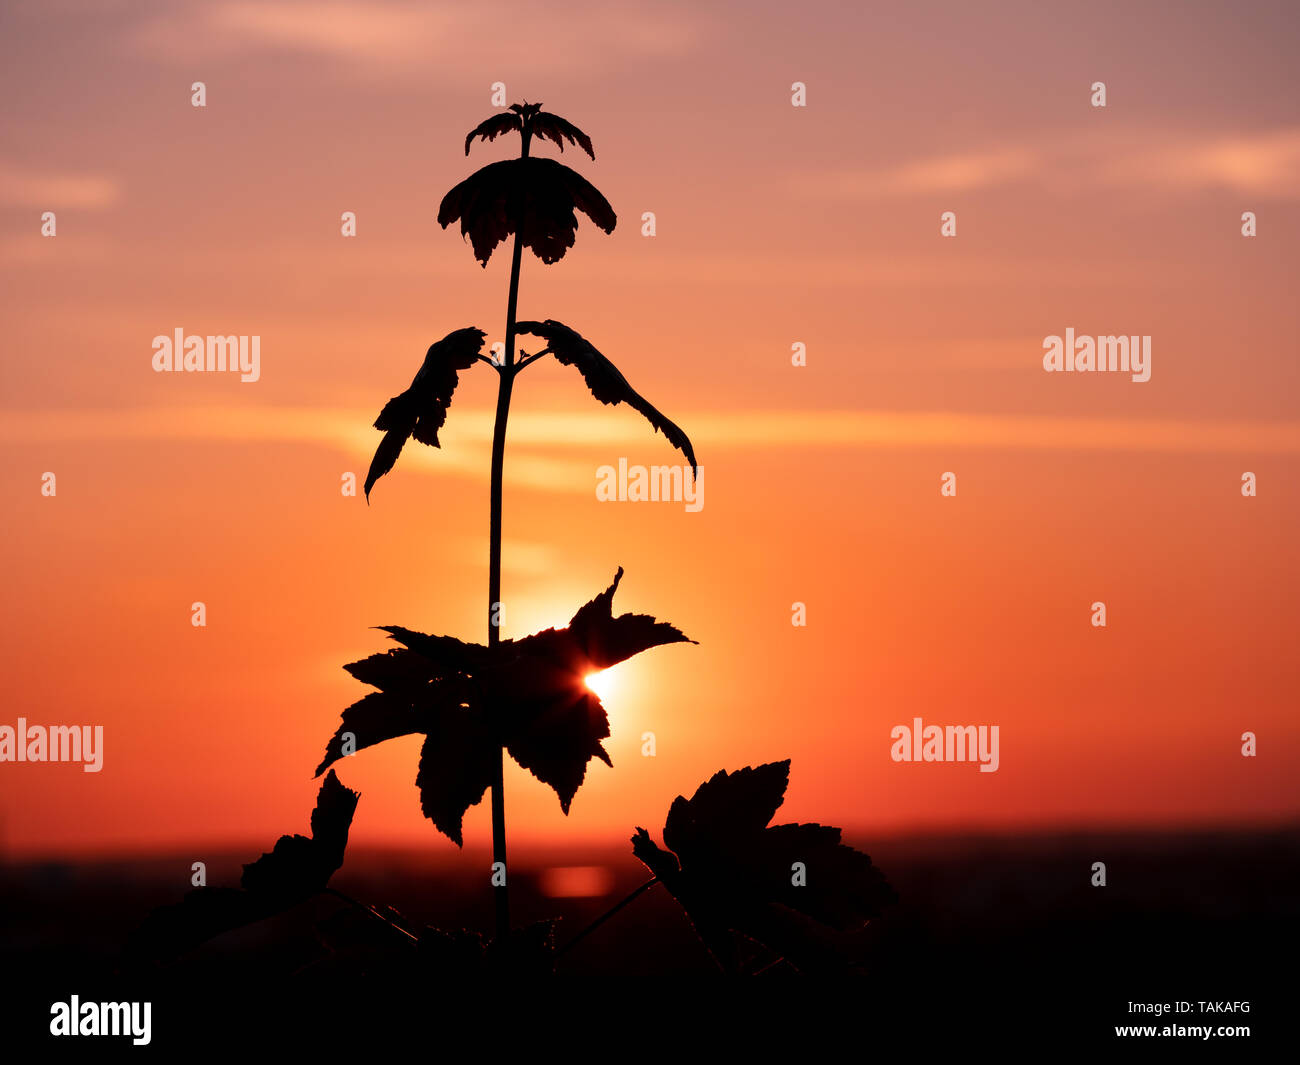 Image of a plant silhouette during sunset. Background Stock Photo